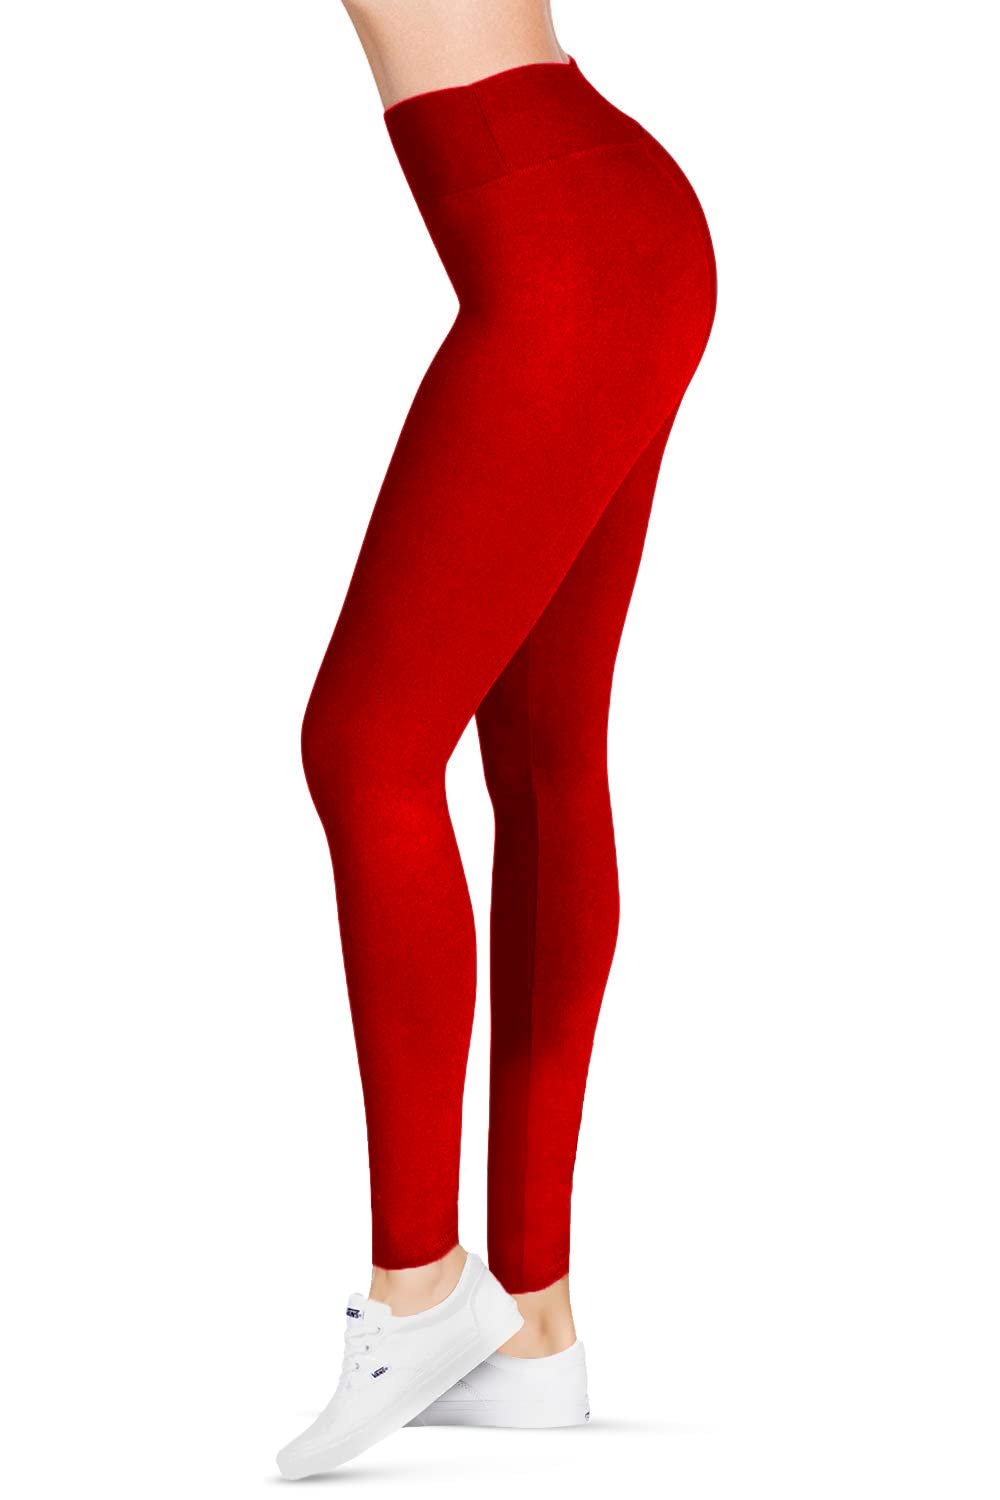 Royal Premium Quality Cotton Leggings for Women XXL (Red), Slim Fit at Rs  125 in Dadhel